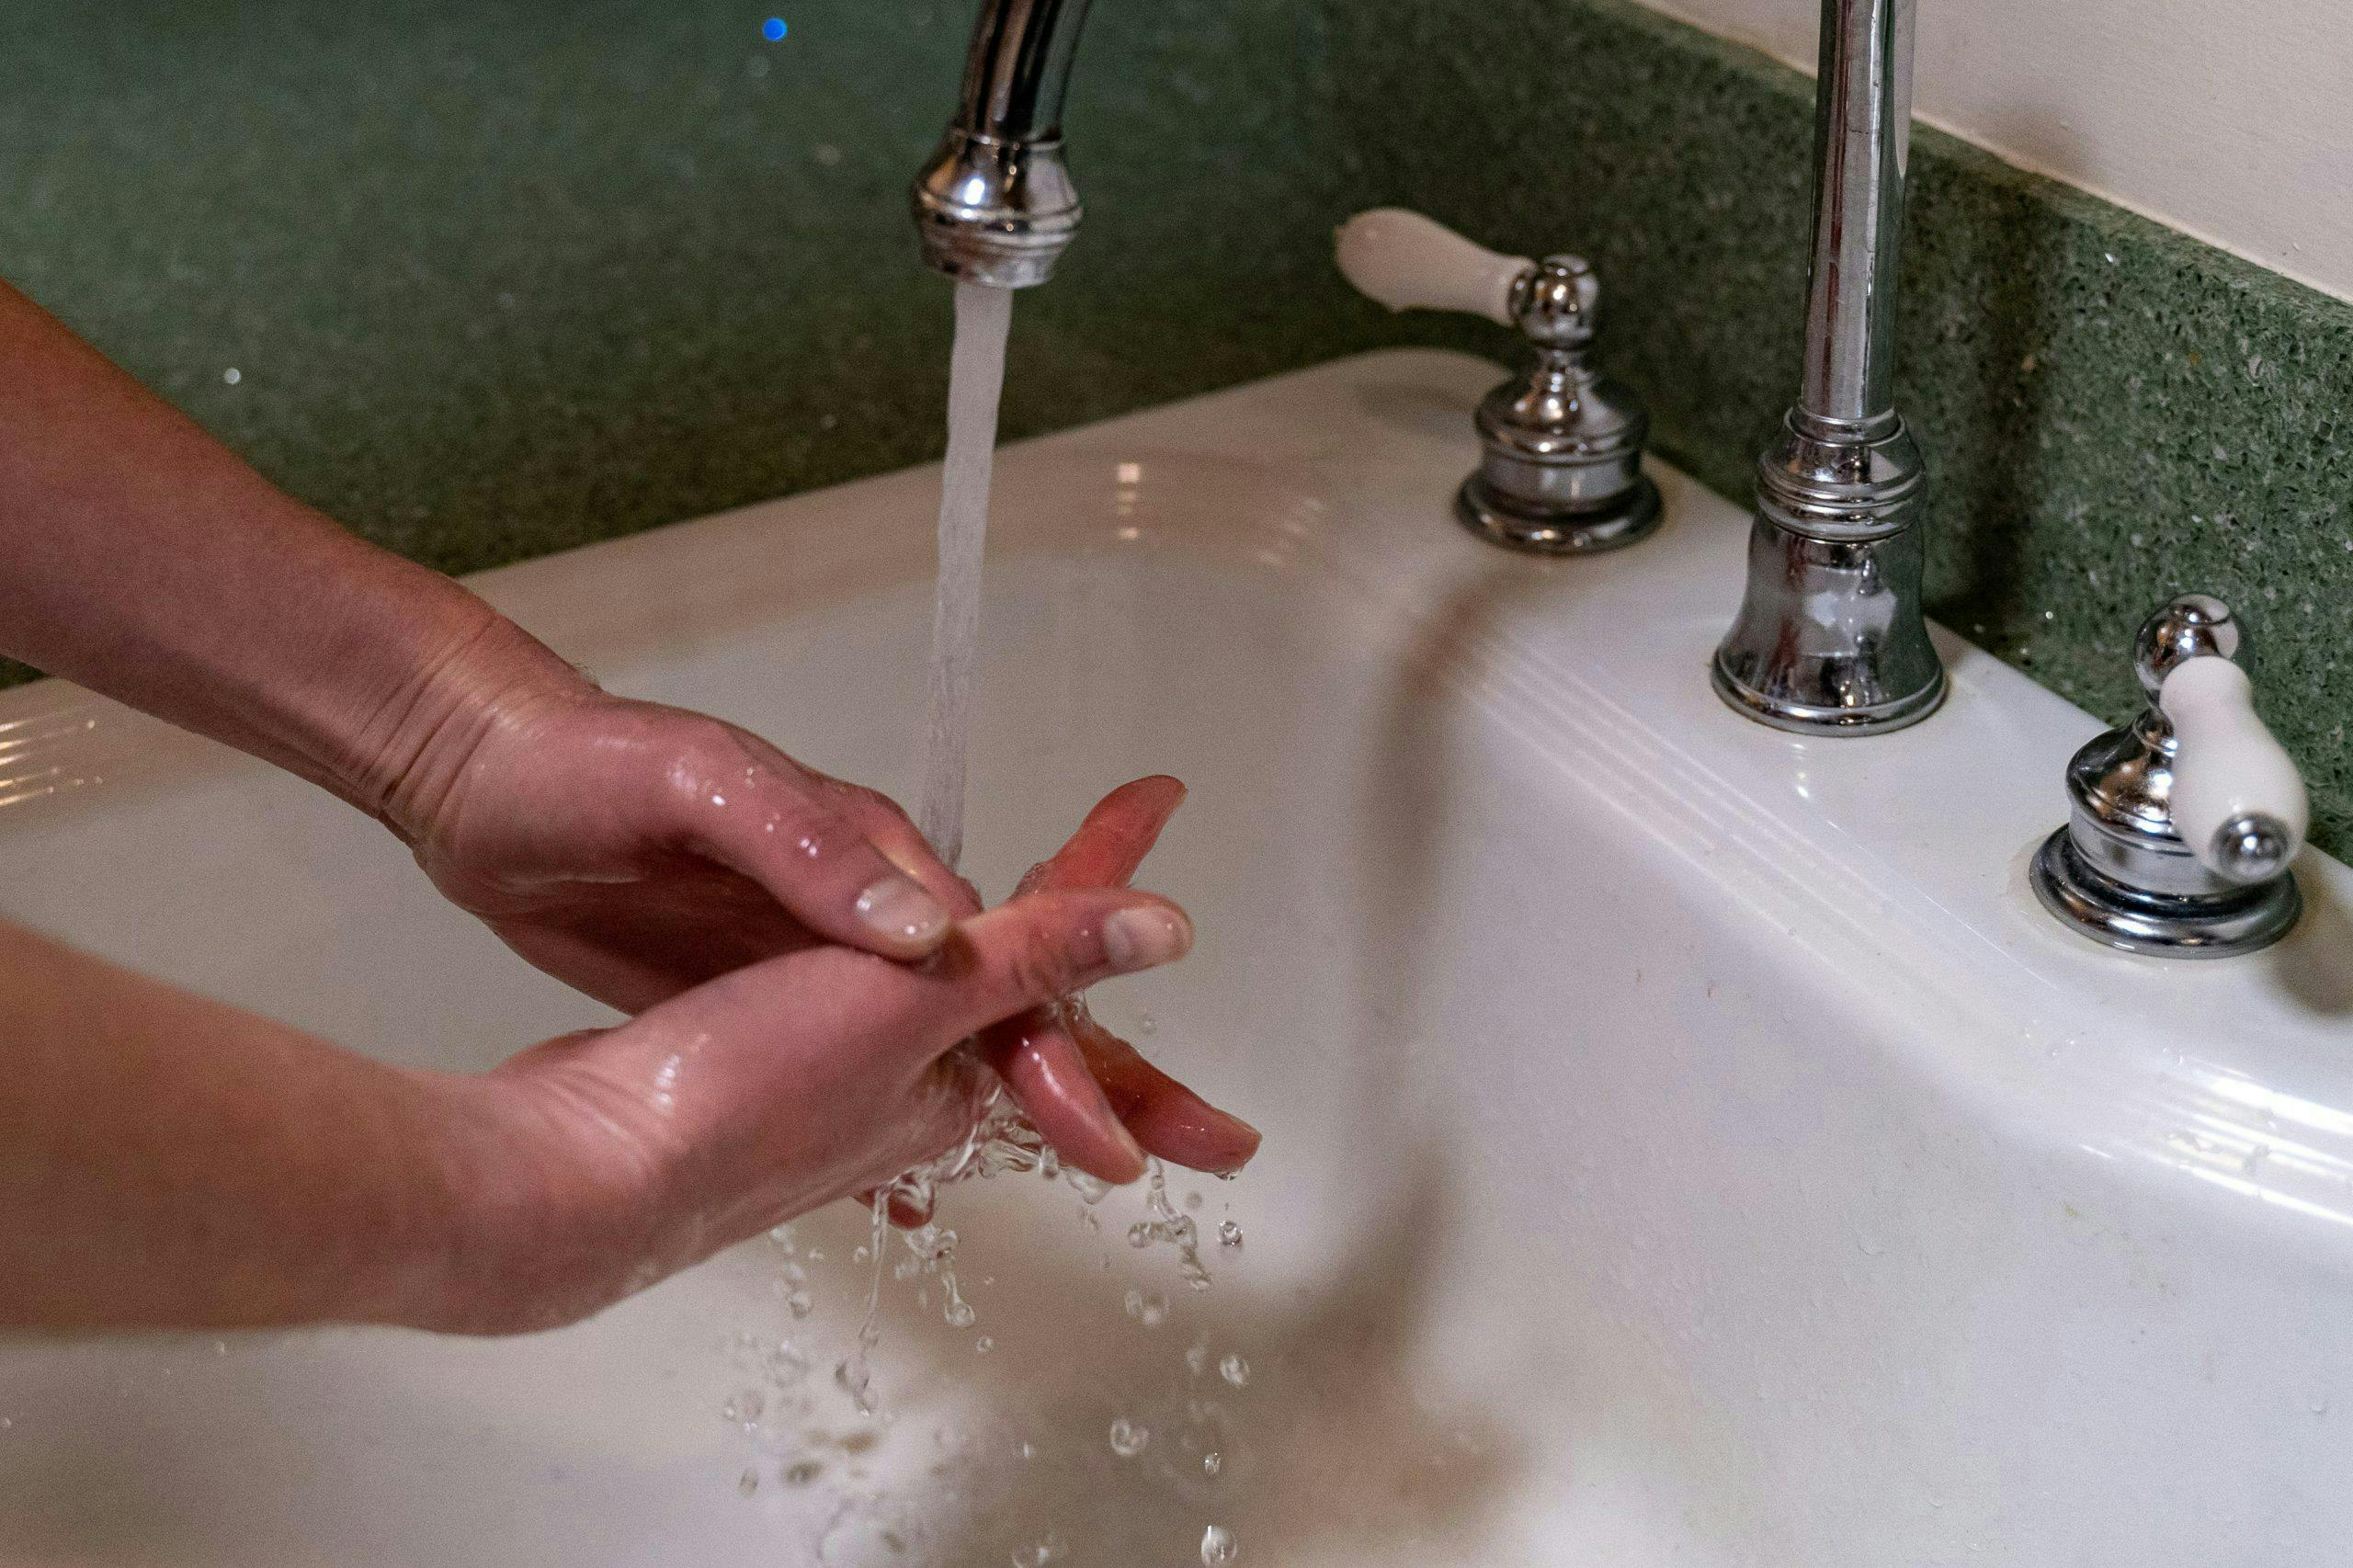 Hands scrub under a running faucet in a white sink, set within a green countertop. Water droplets splash as the tap flows.